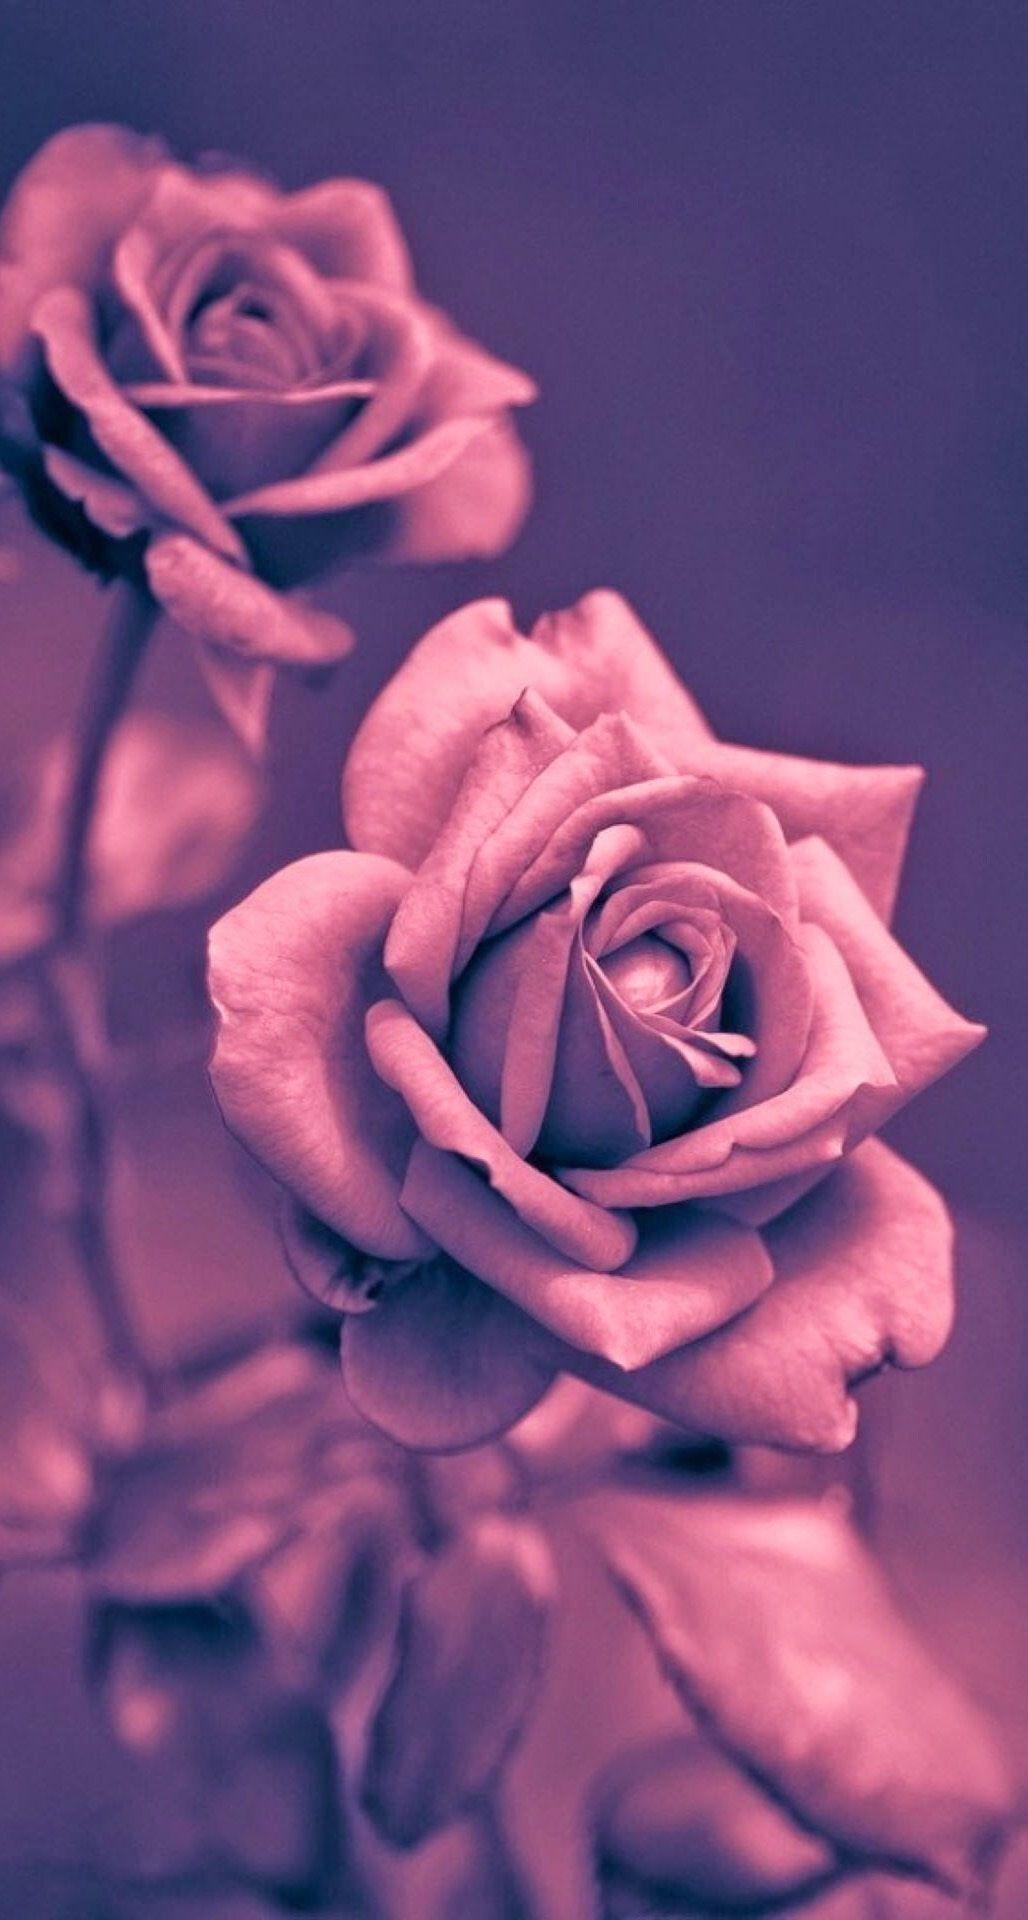 Pretty Rose iPhone Wallpaper Free Pretty Rose iPhone Background